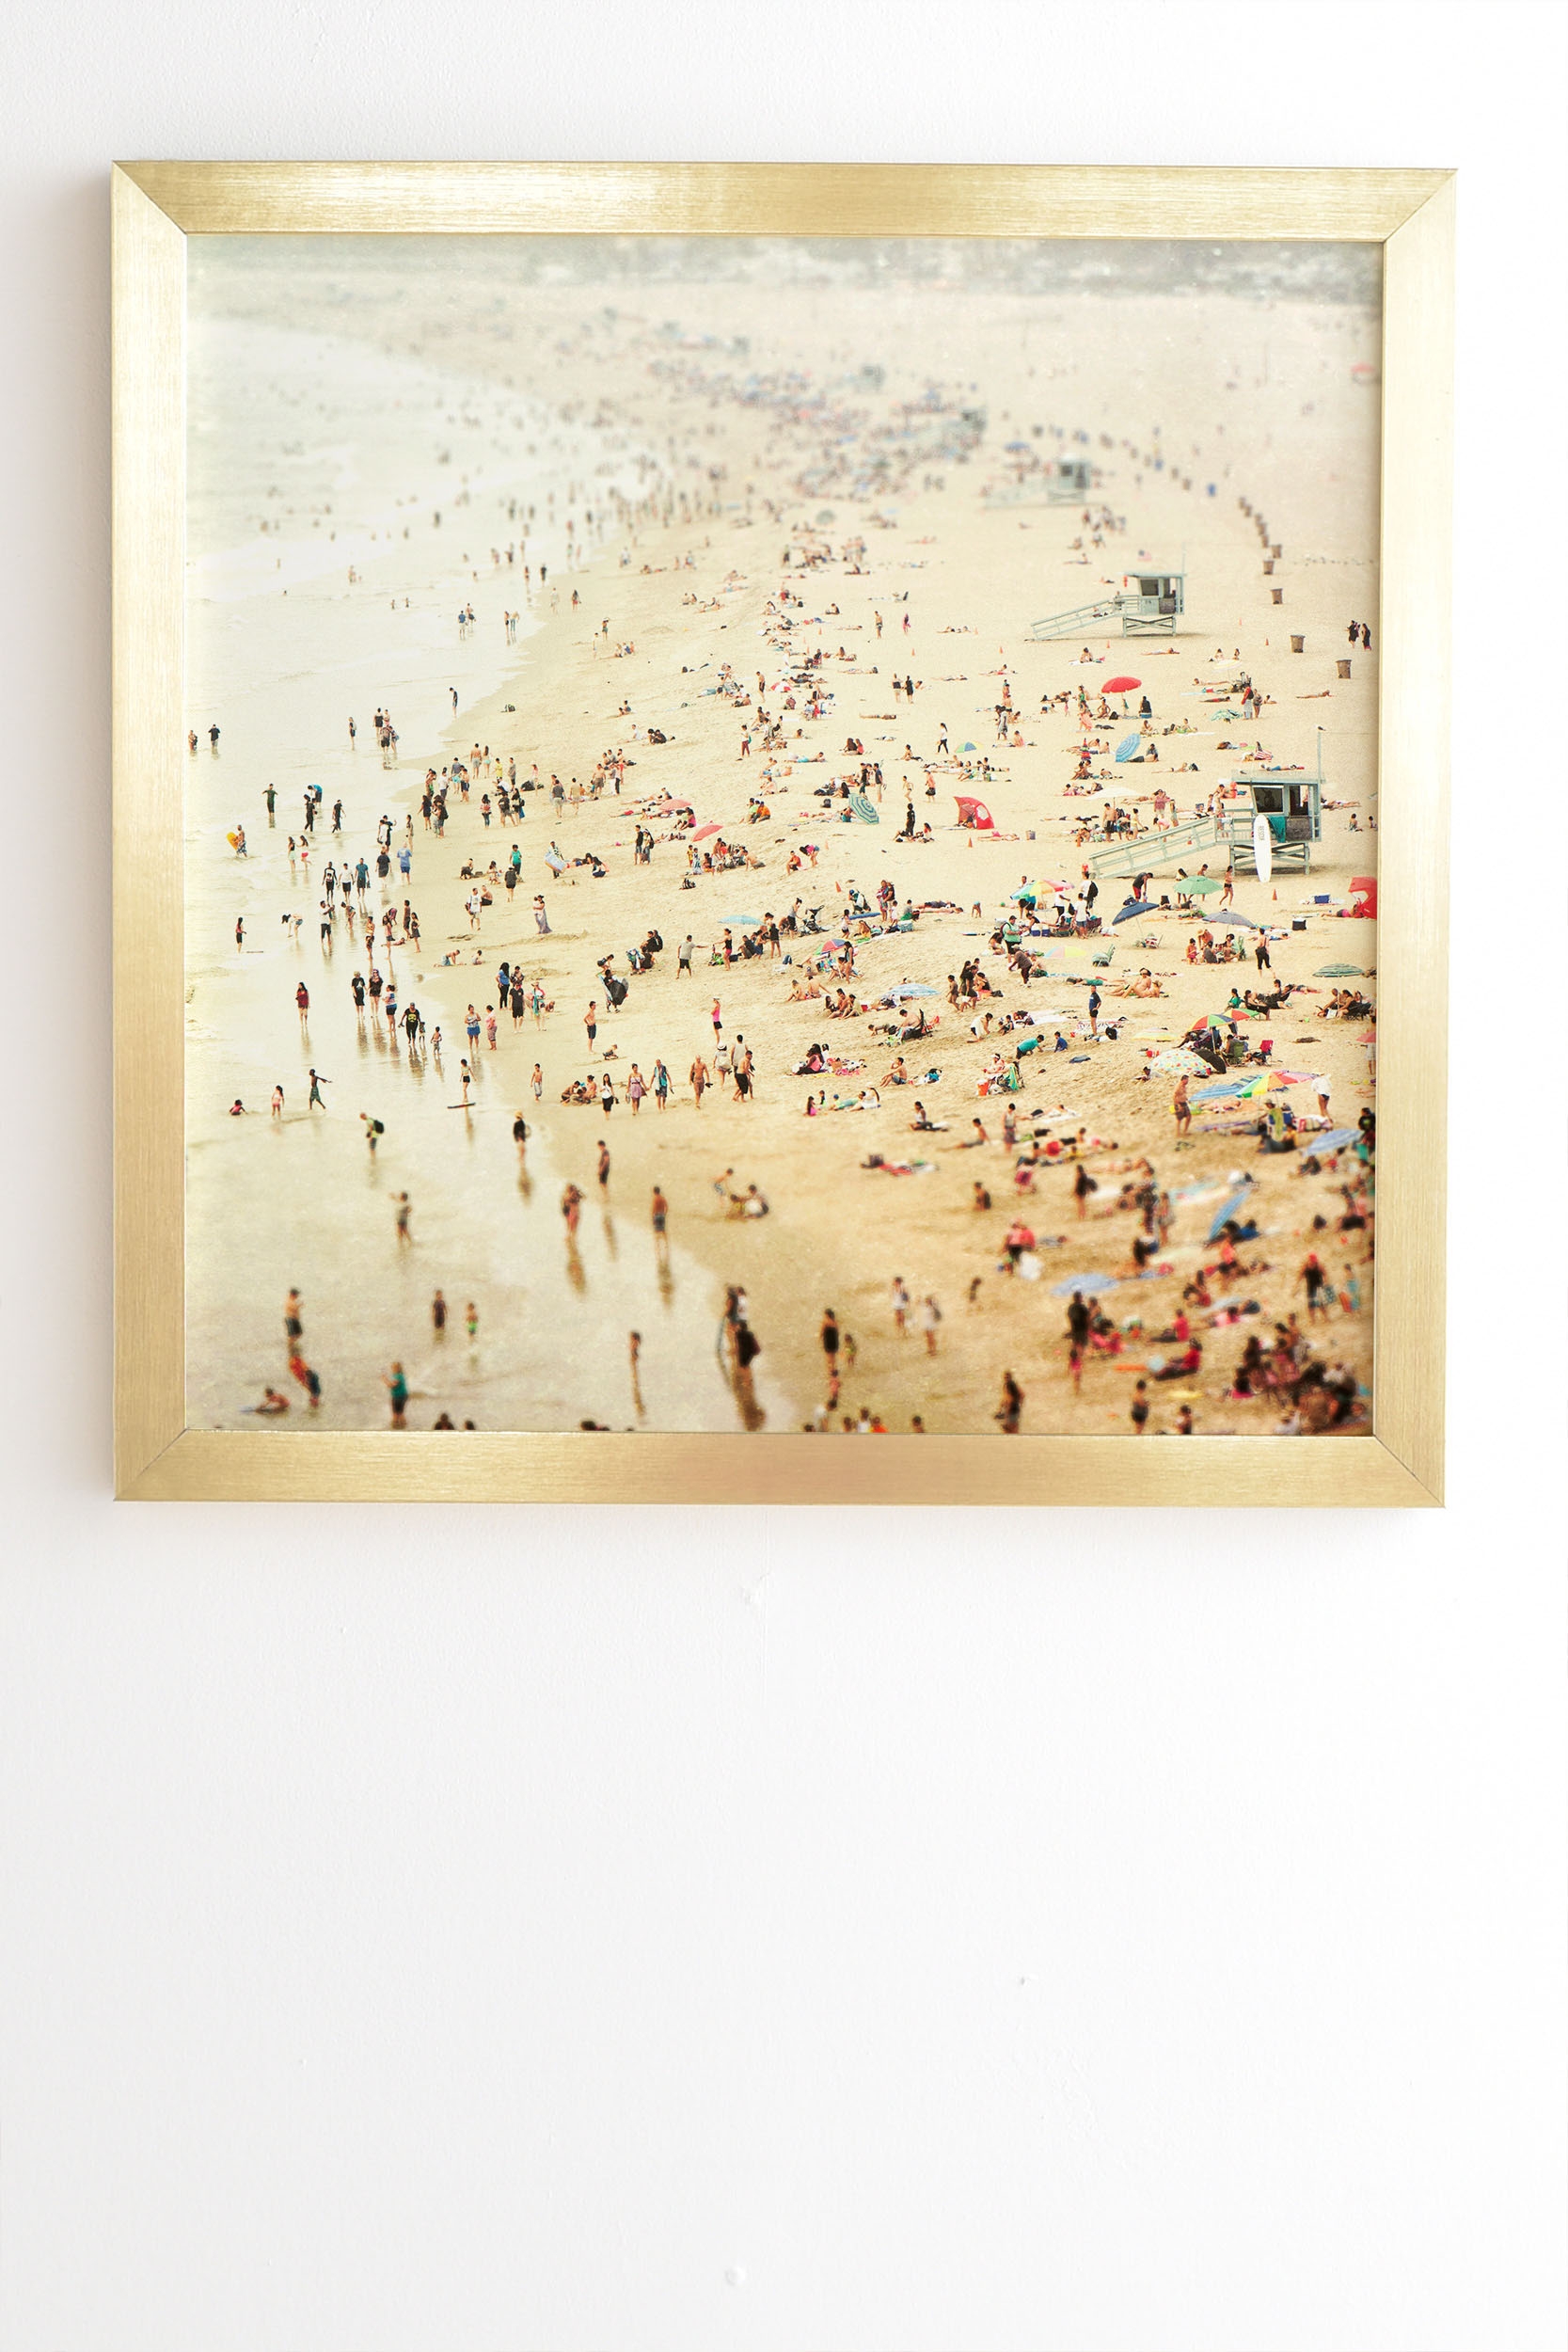 In The Crowd by Bree Madden - Framed Wall Art Basic Gold 20" x 20" - Image 1